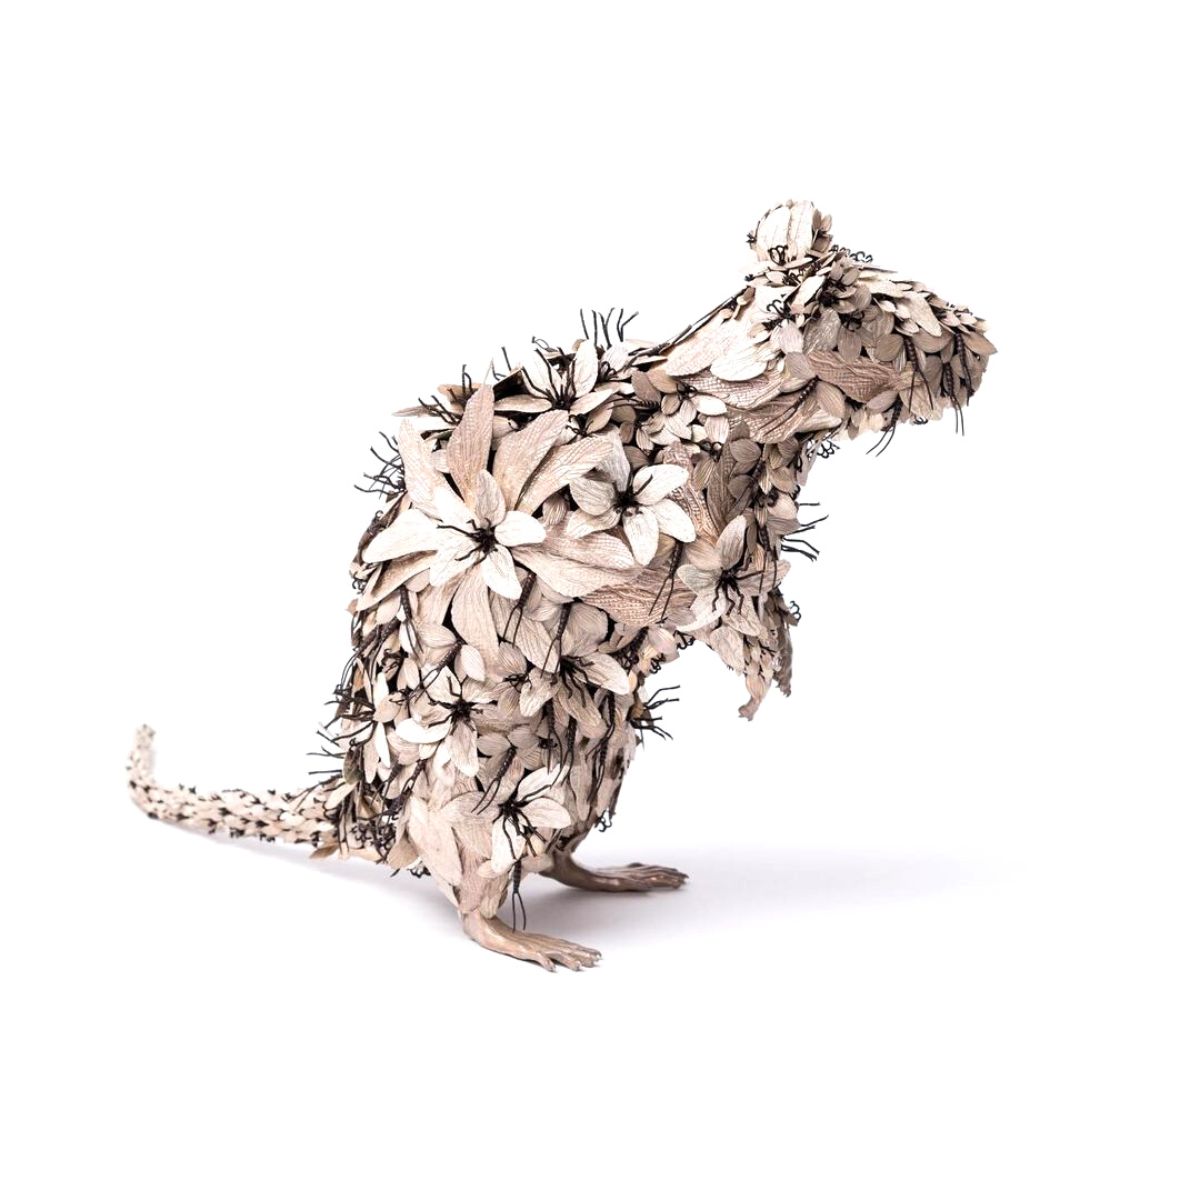 Animal sculptures made from metallic flowers mouse on Thursd